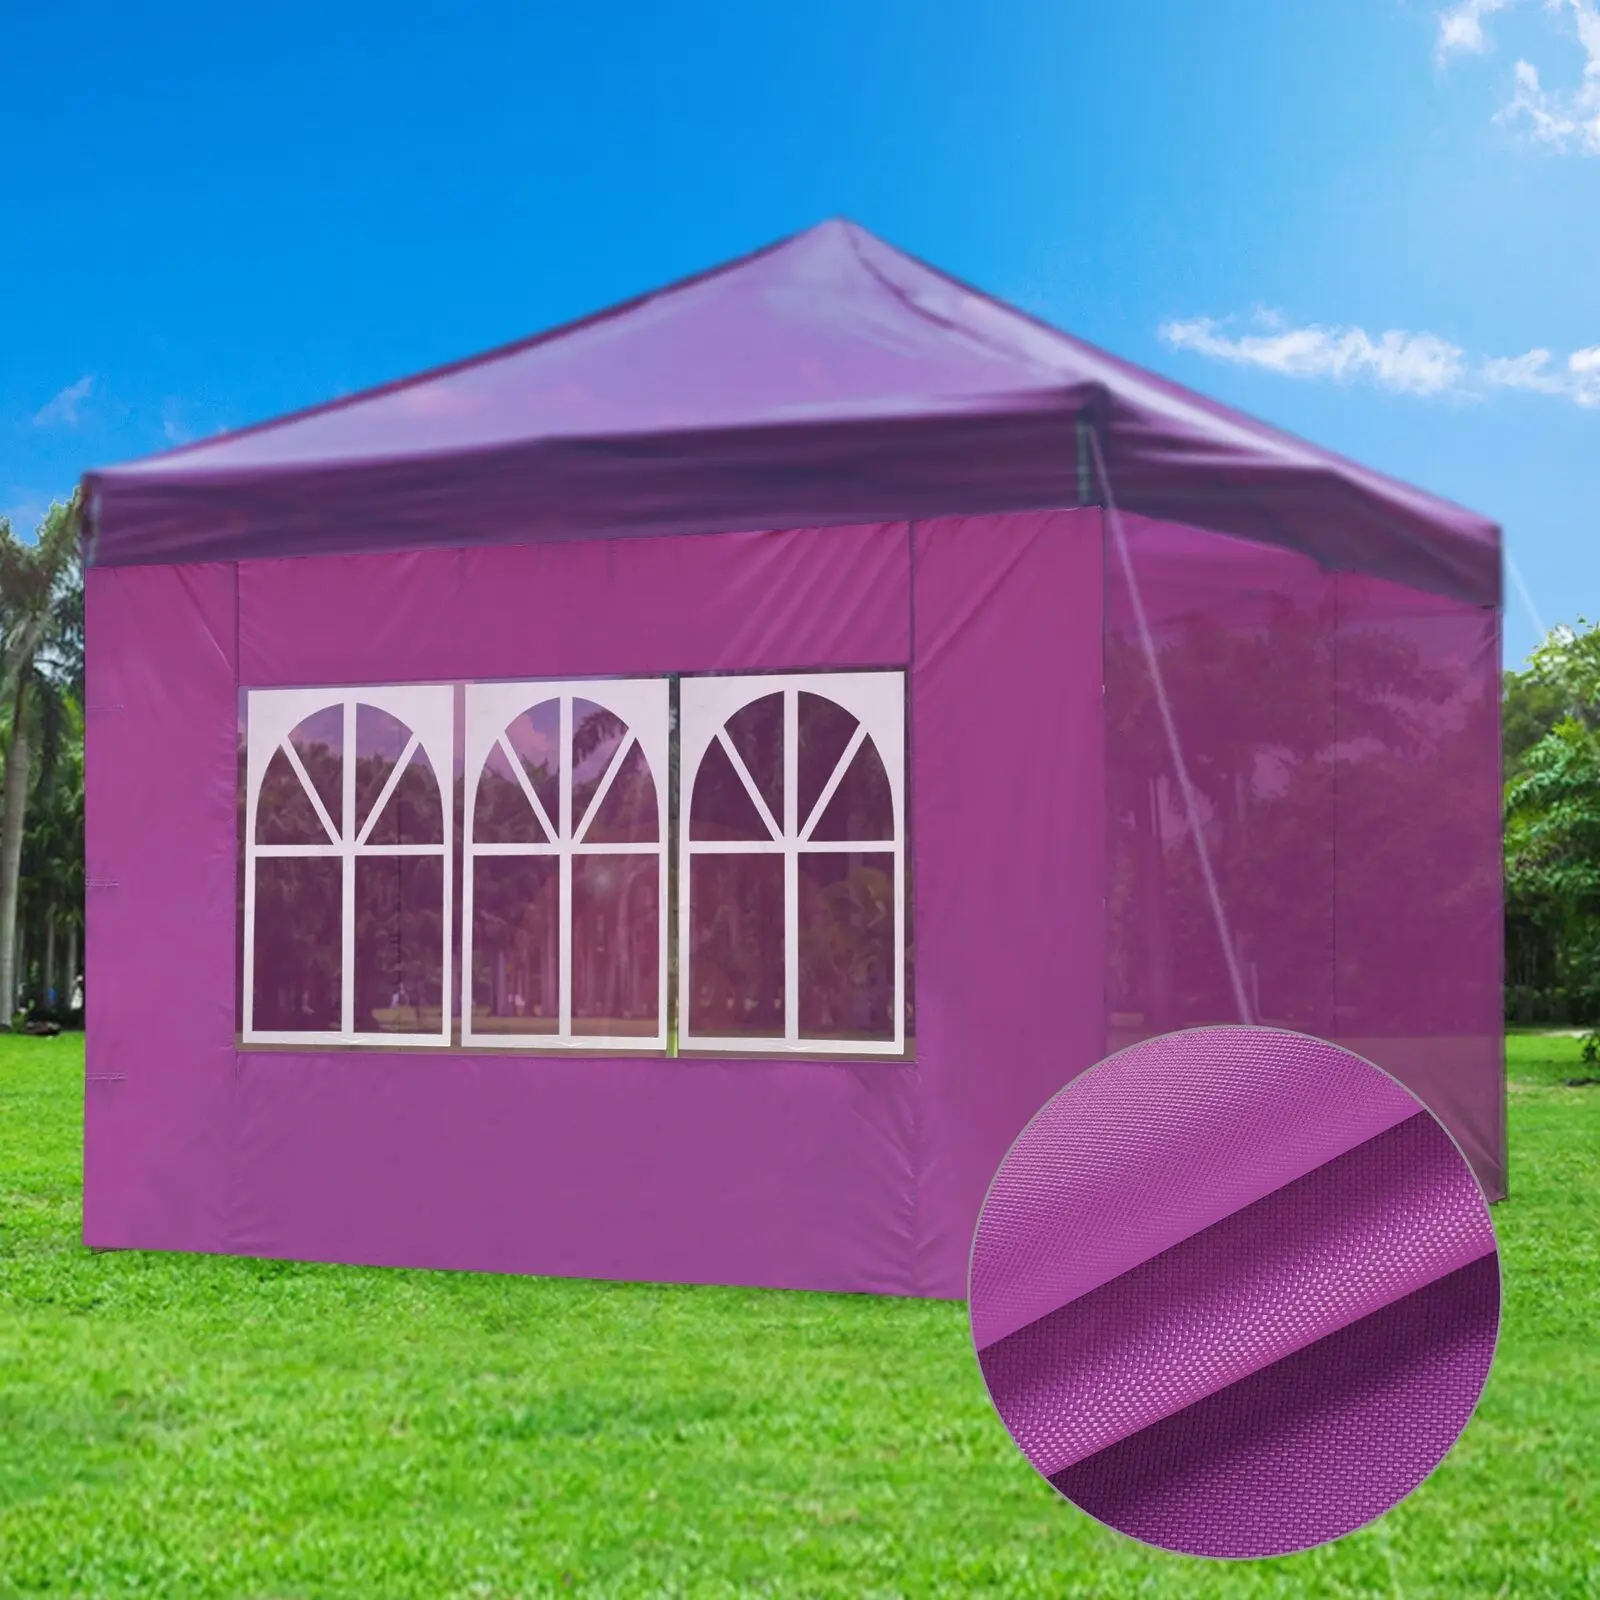 10x7ft Canopy Gazebo with Windows UV30+ Protection & Fade Resistance Purple